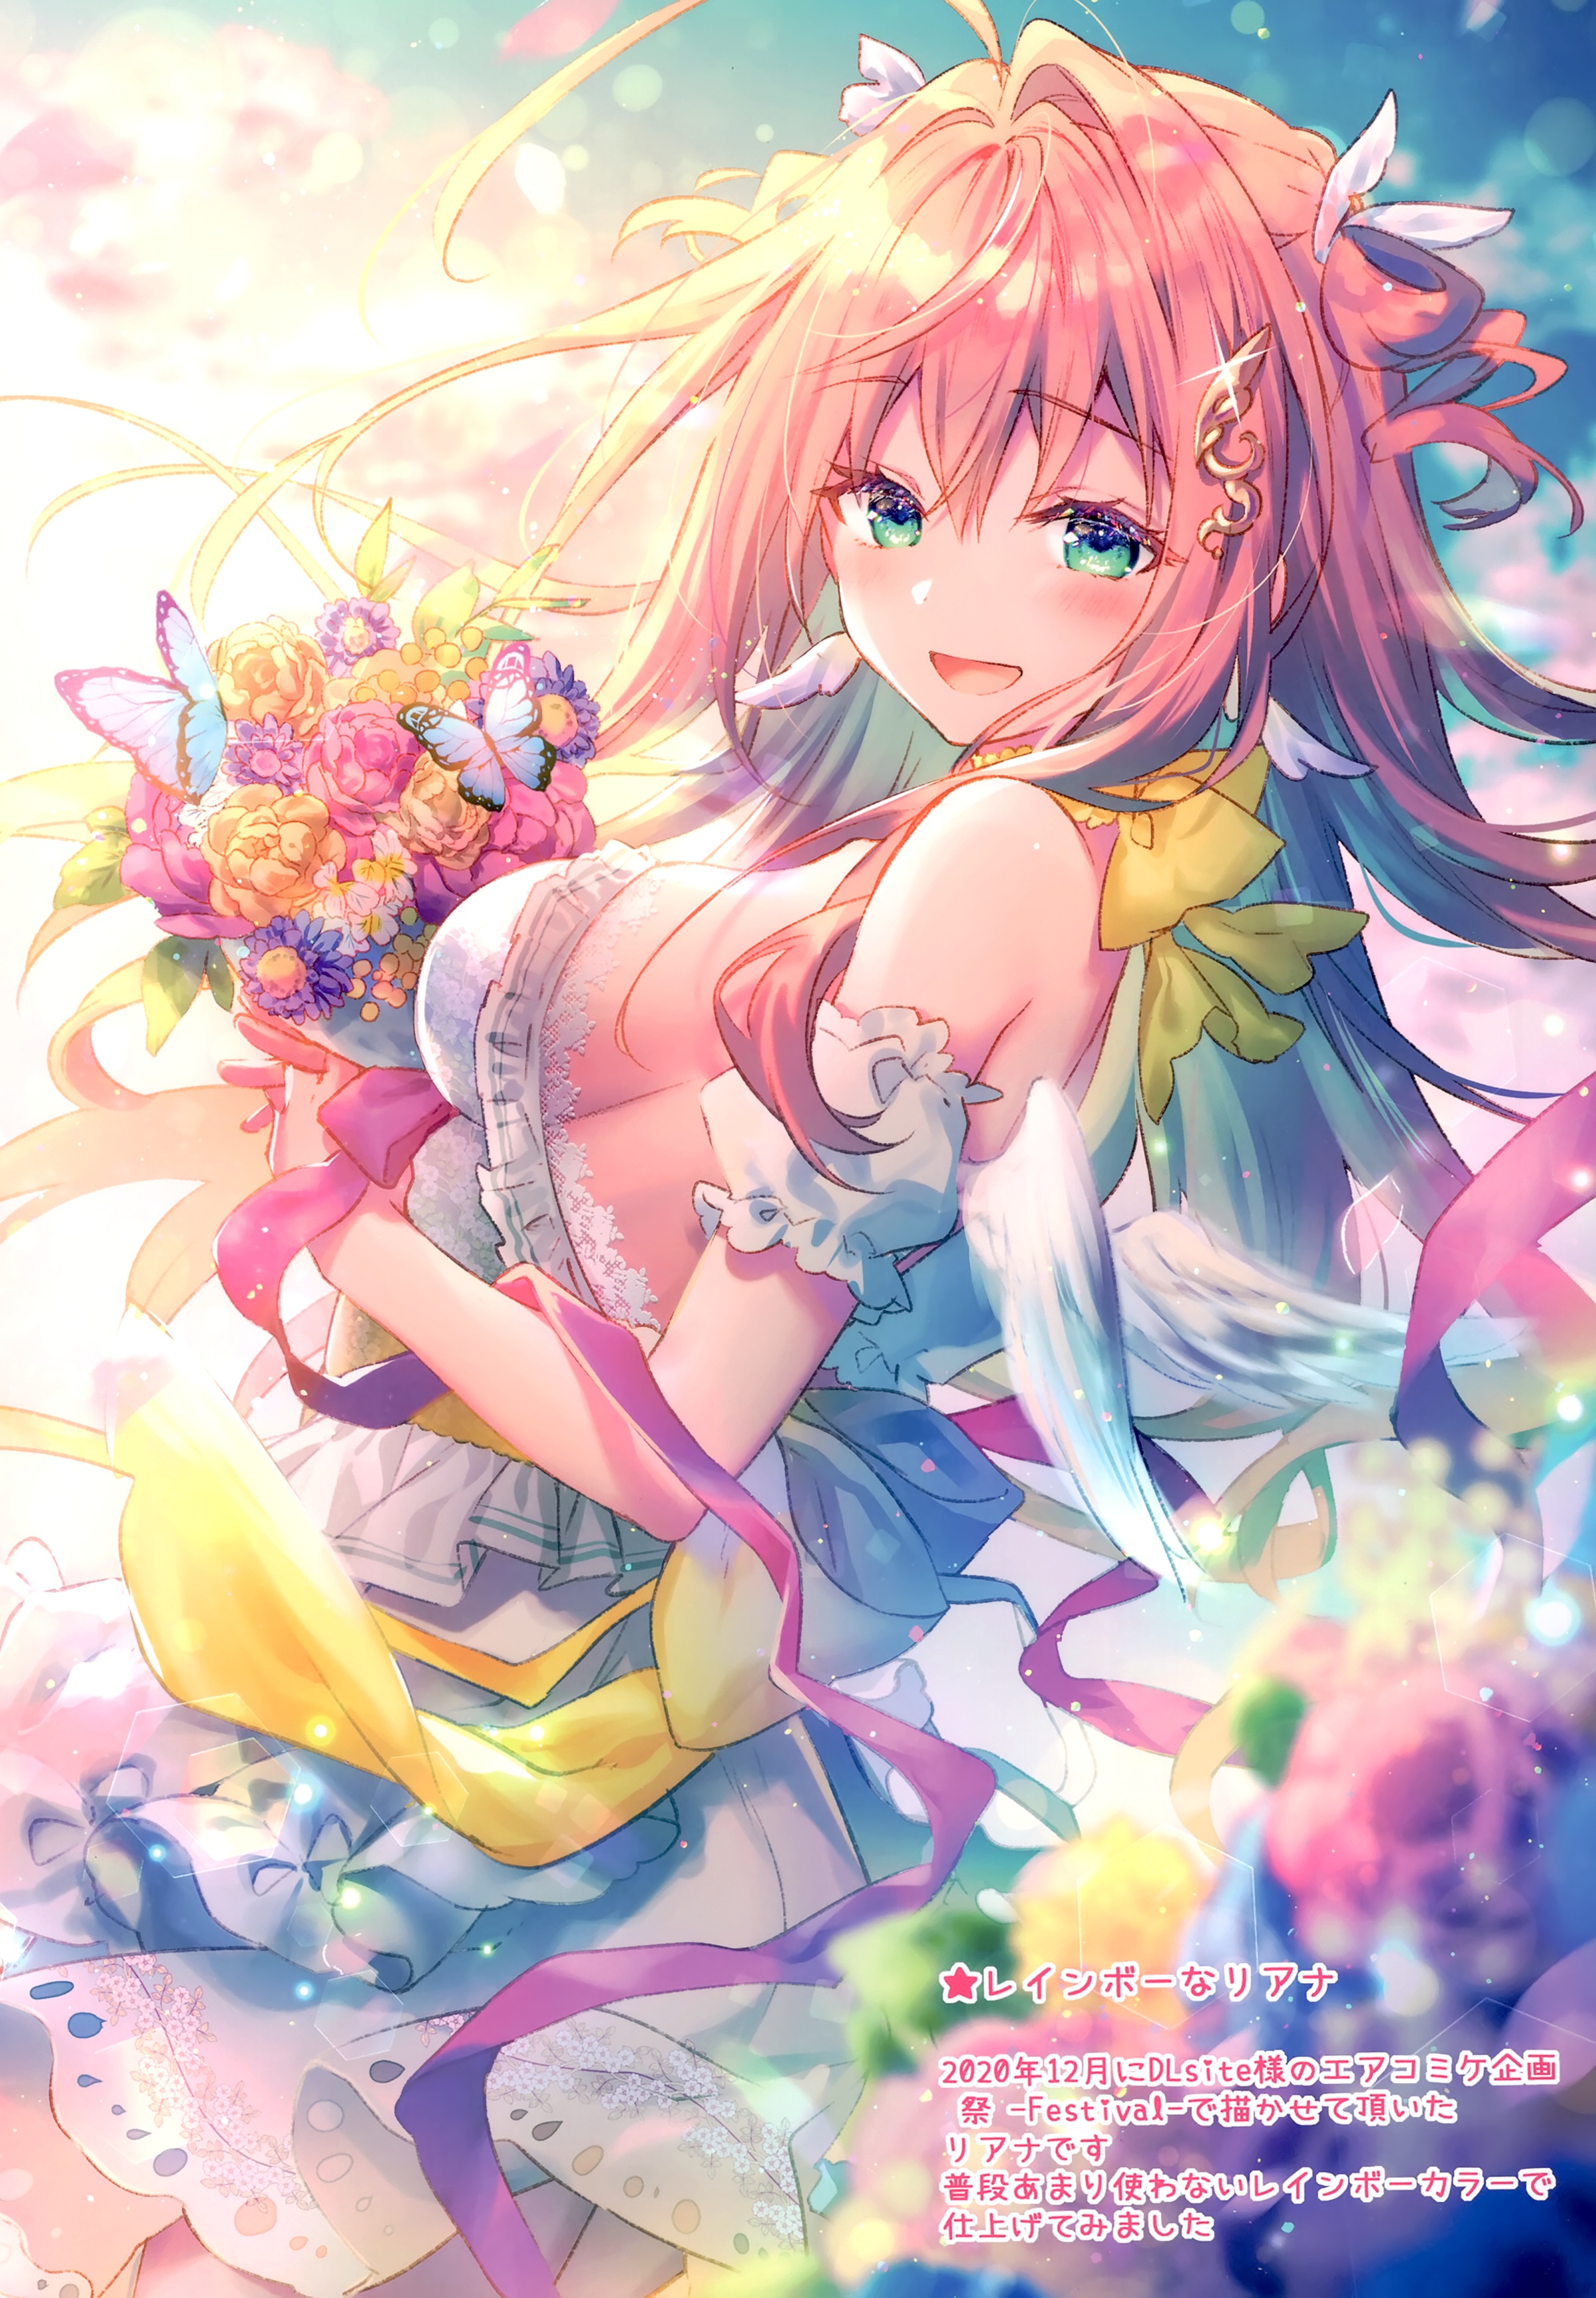 Anime 2406x3464 anime girls Riichu Rianastia Flugel wings angel wings dress sideboob pink hair blue eyes blushing white dress ribbon Japanese hair ornament flowers bouquets butterfly looking at viewer smiling colorful portrait display big boobs text